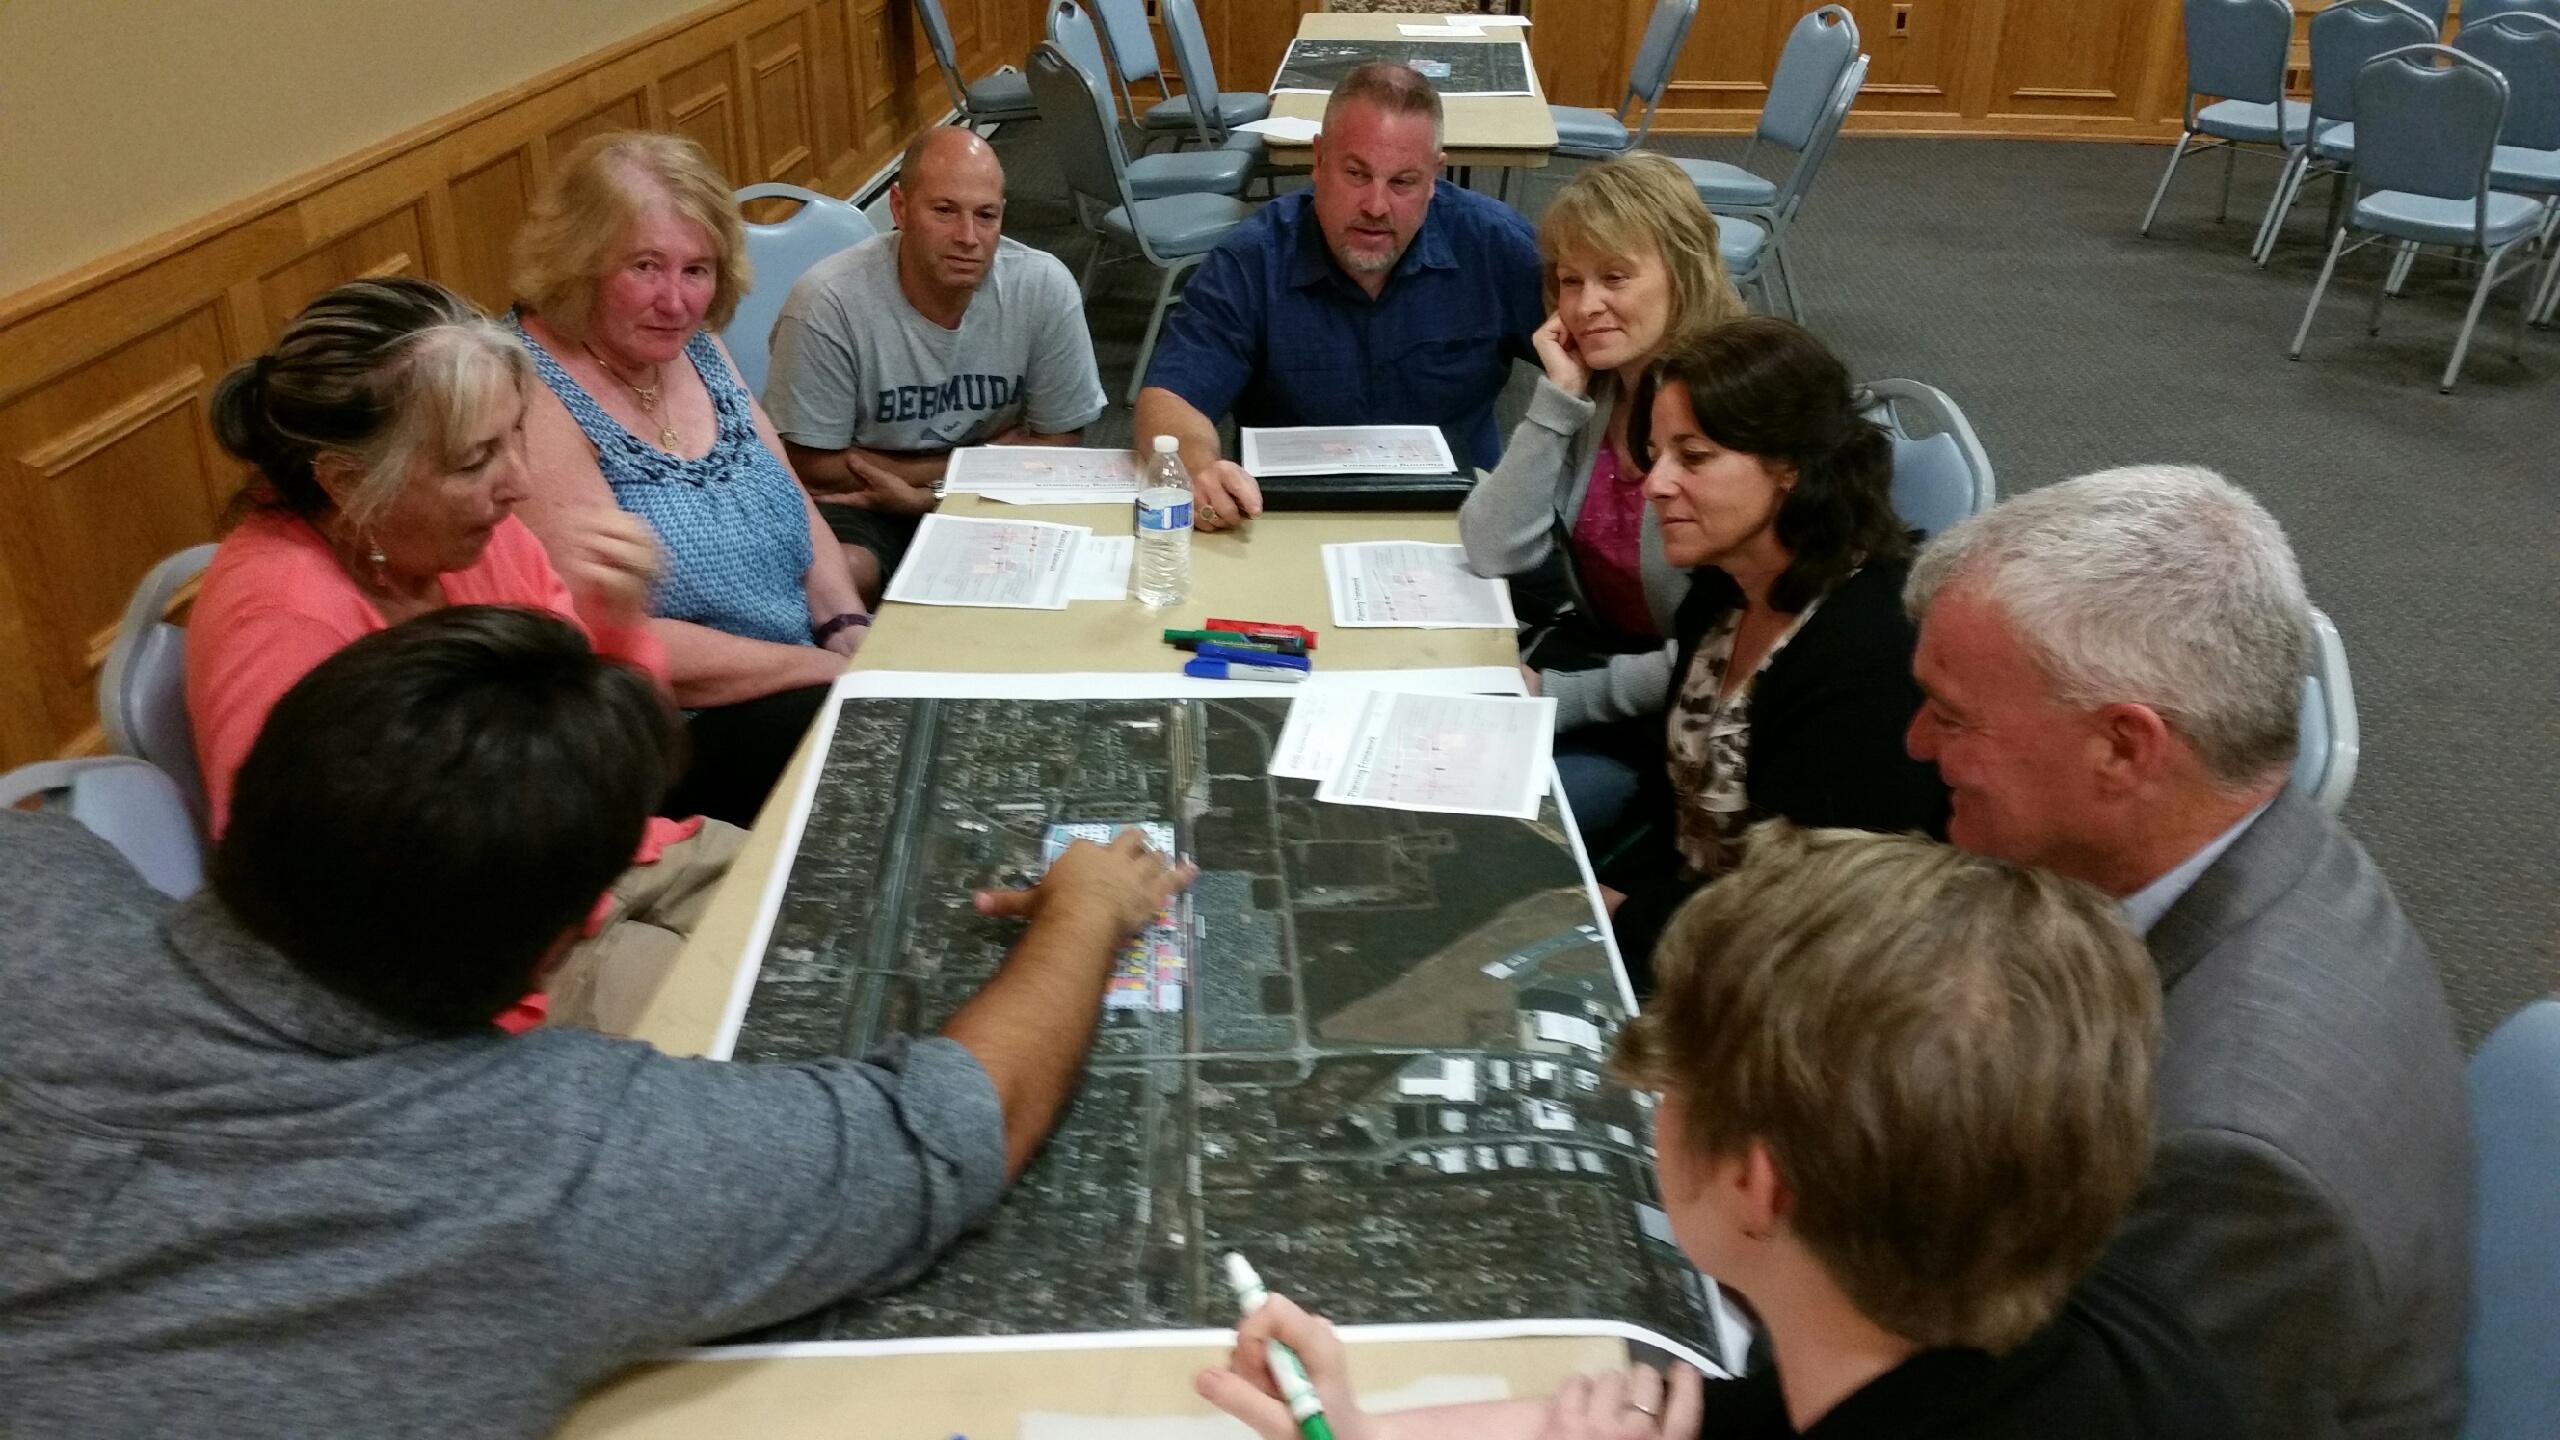 The first collaborative planning session between the Ronkonkoma Civic Association, Ronkonkoma community and Regional Plan Association took place September 12, 2016